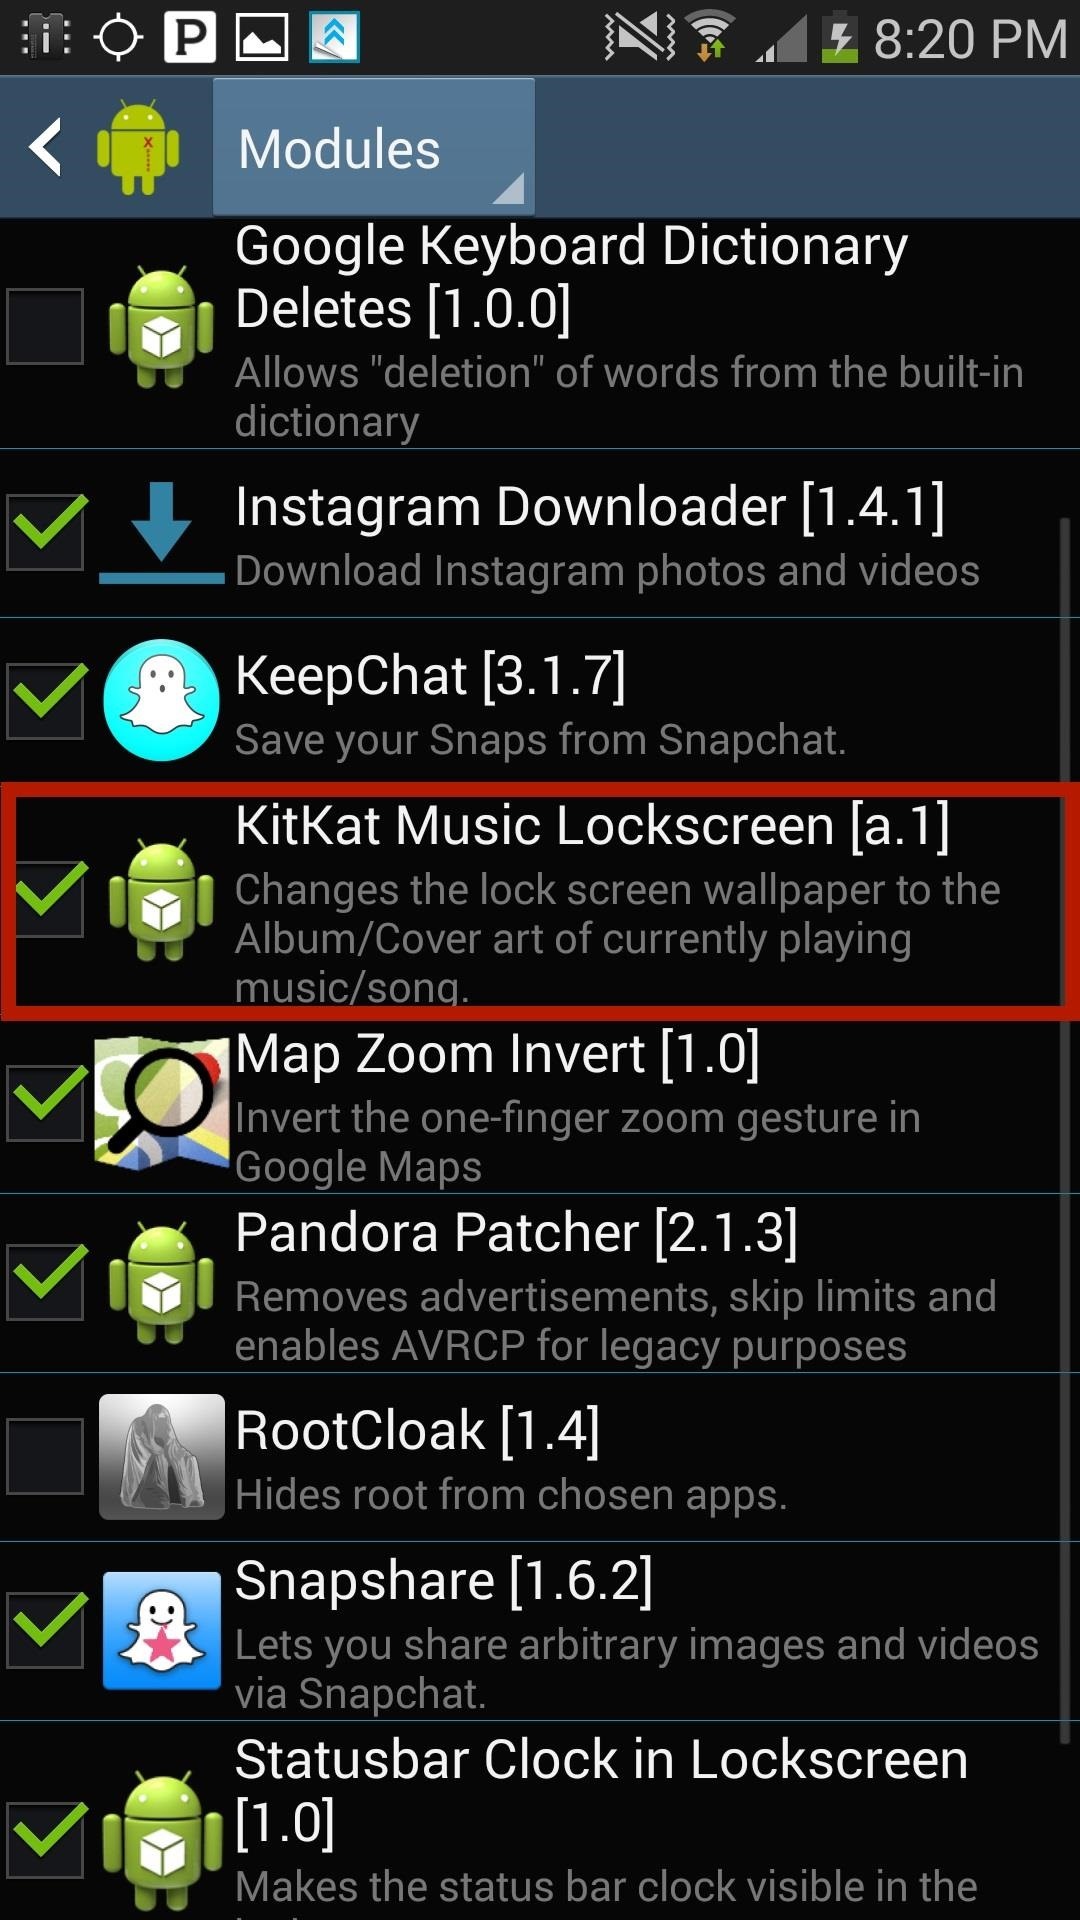 How to Get a KitKat-Style Music Lock Screen on Your Samsung Galaxy Note 3